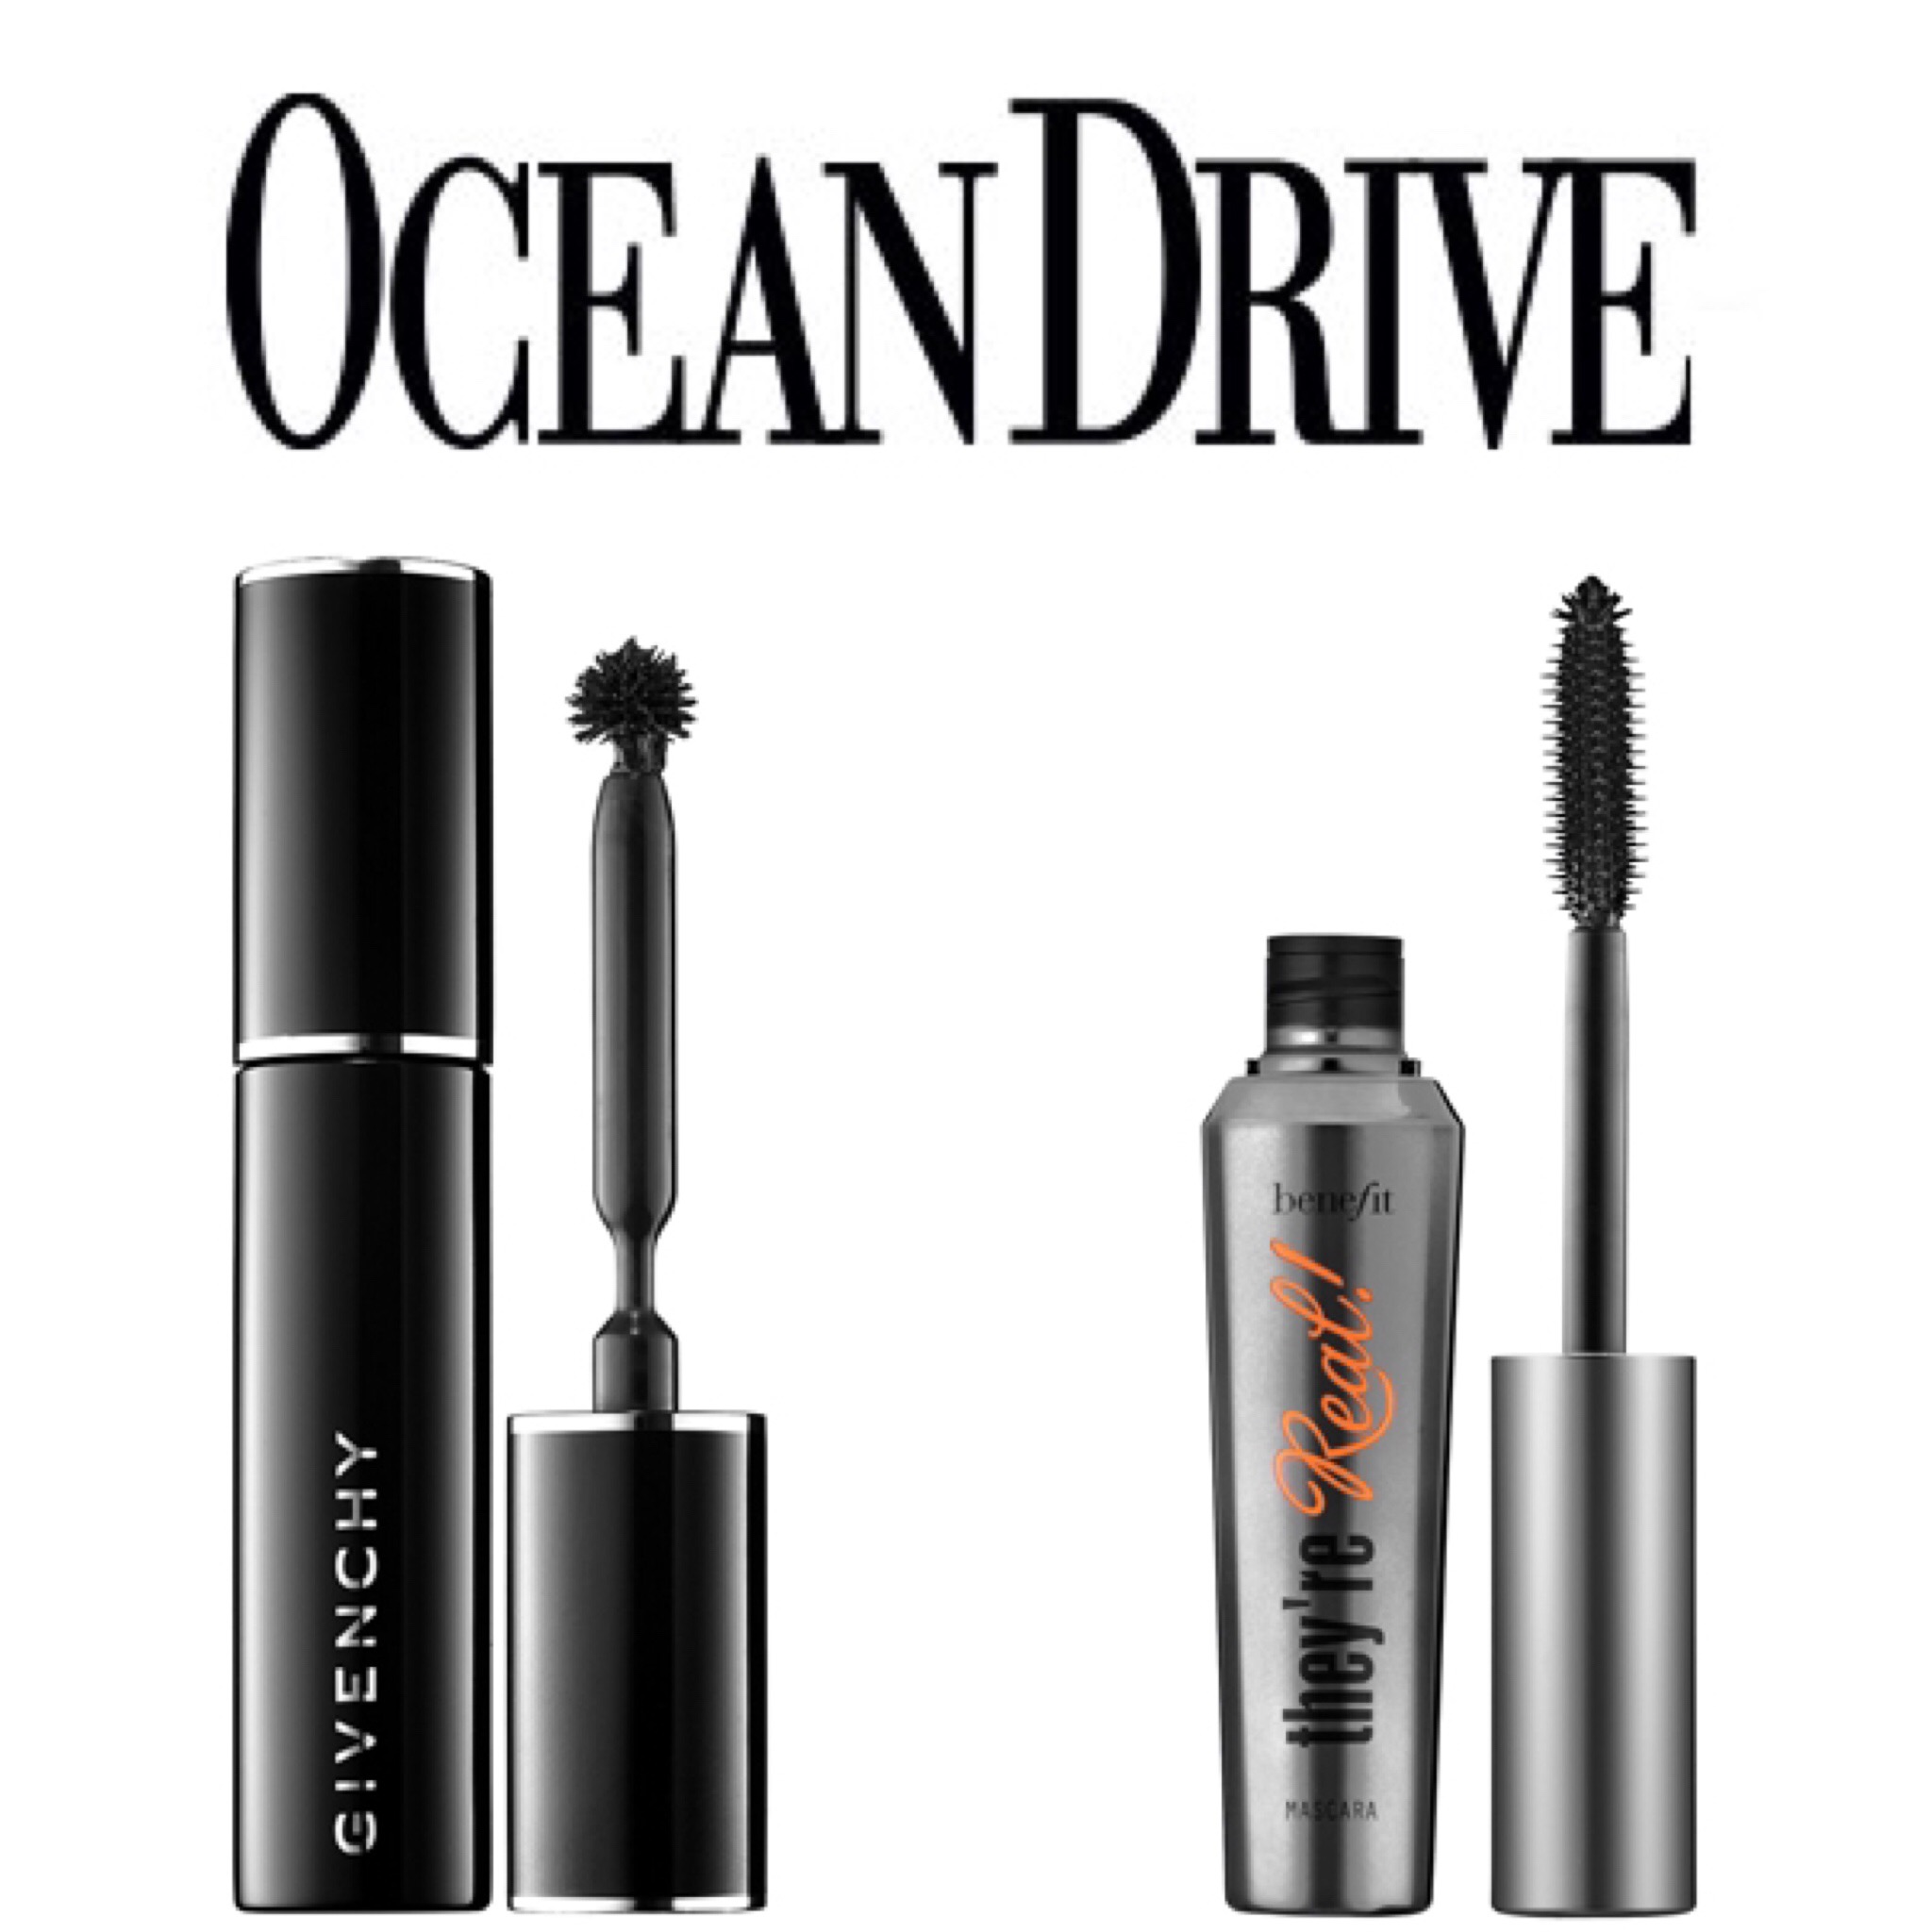  https://oceandrive.com/best-mascaras-for-length-and-volume-to-try-this-fall 